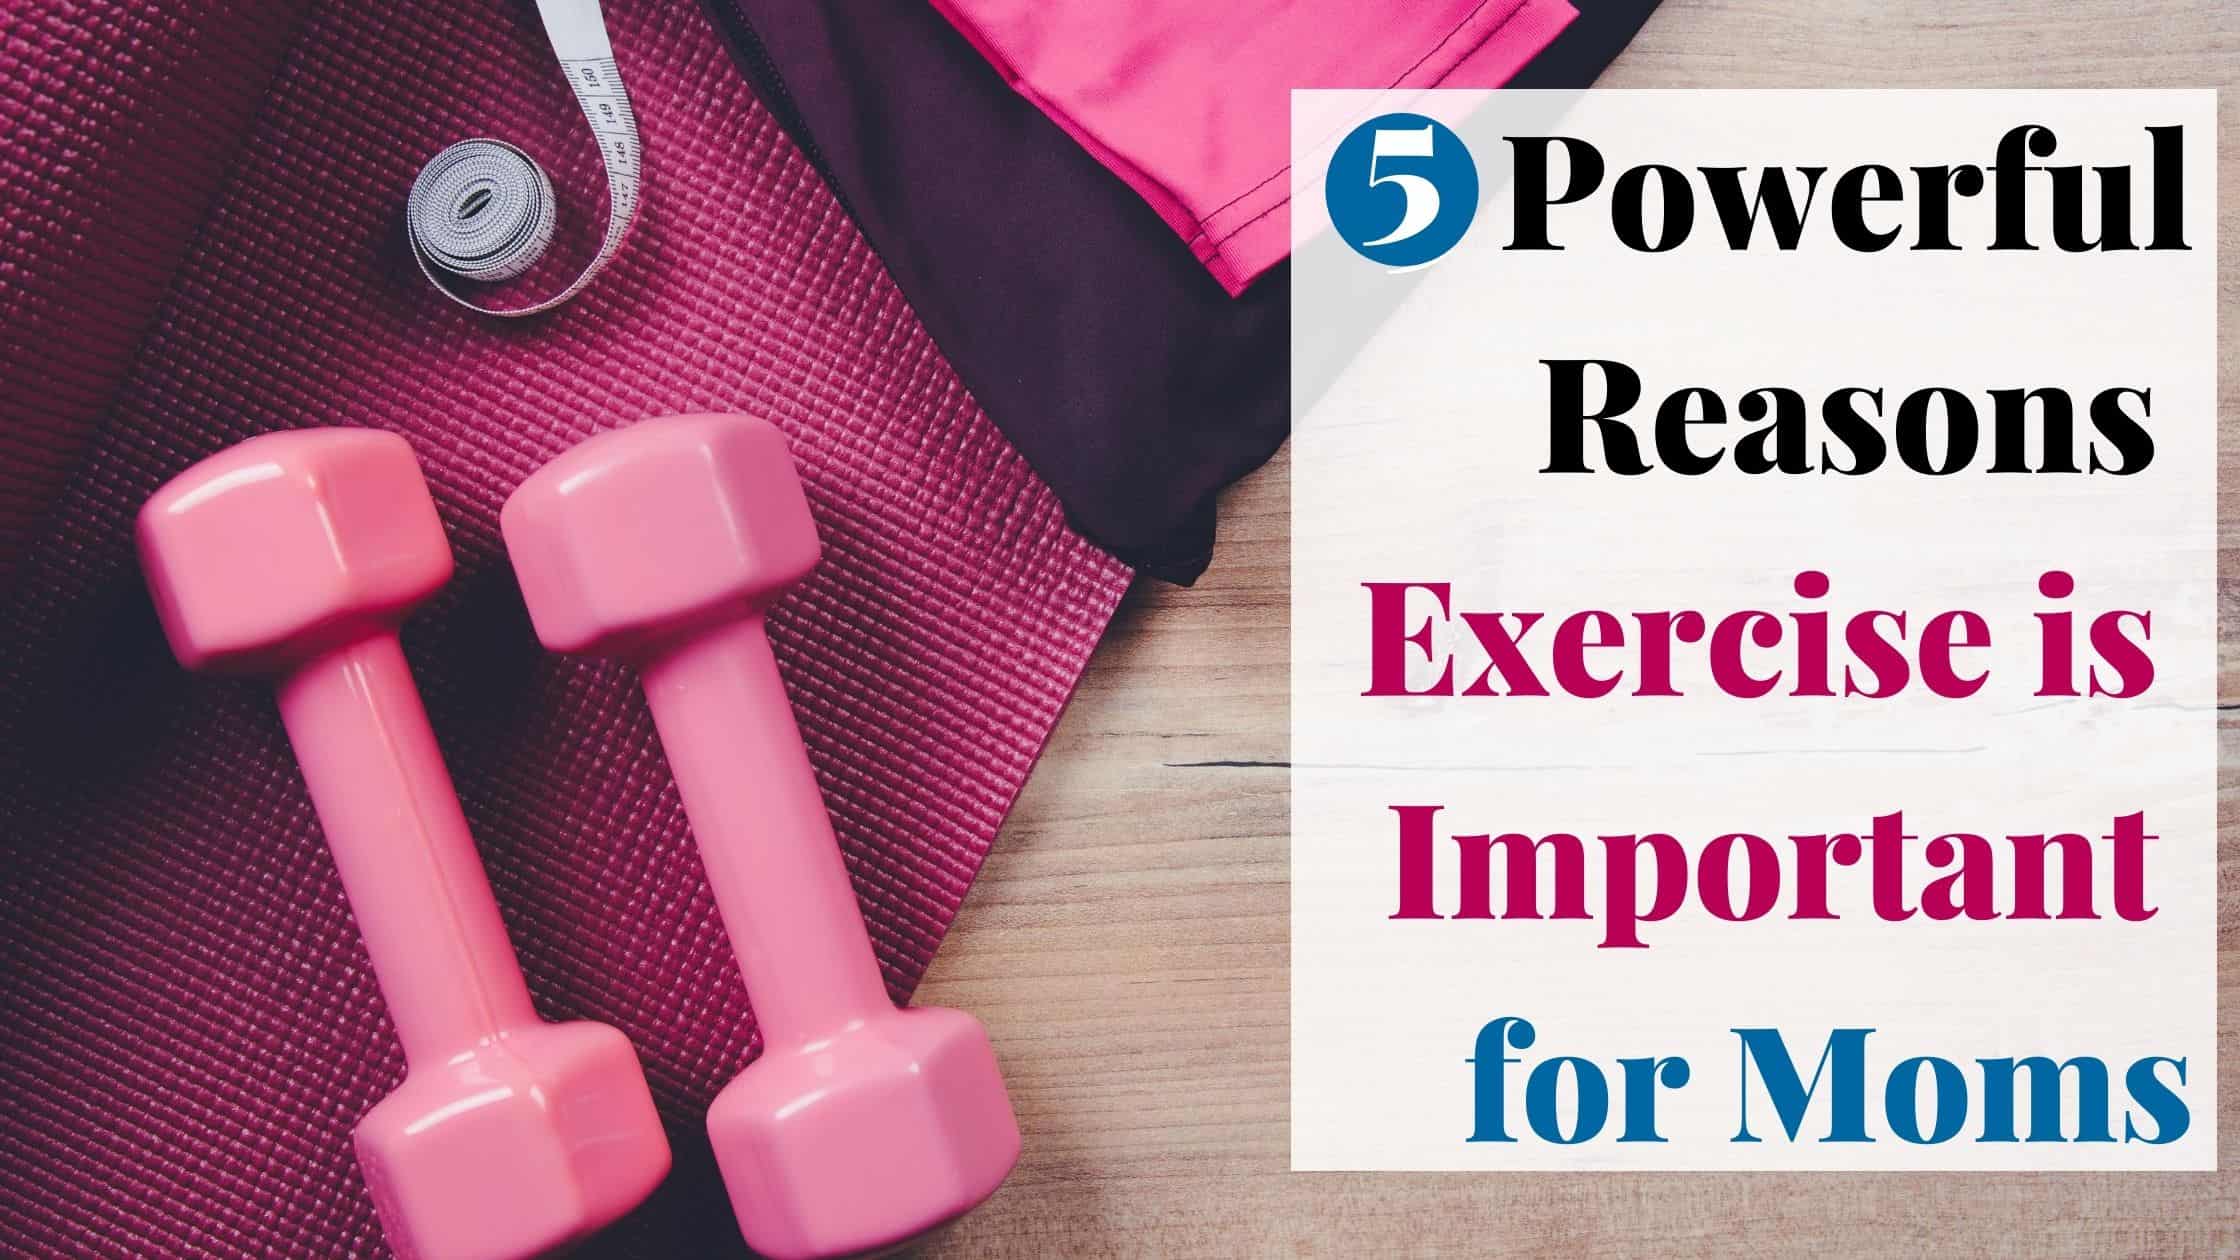 5 Powerful Reasons Exercise is Important for Moms